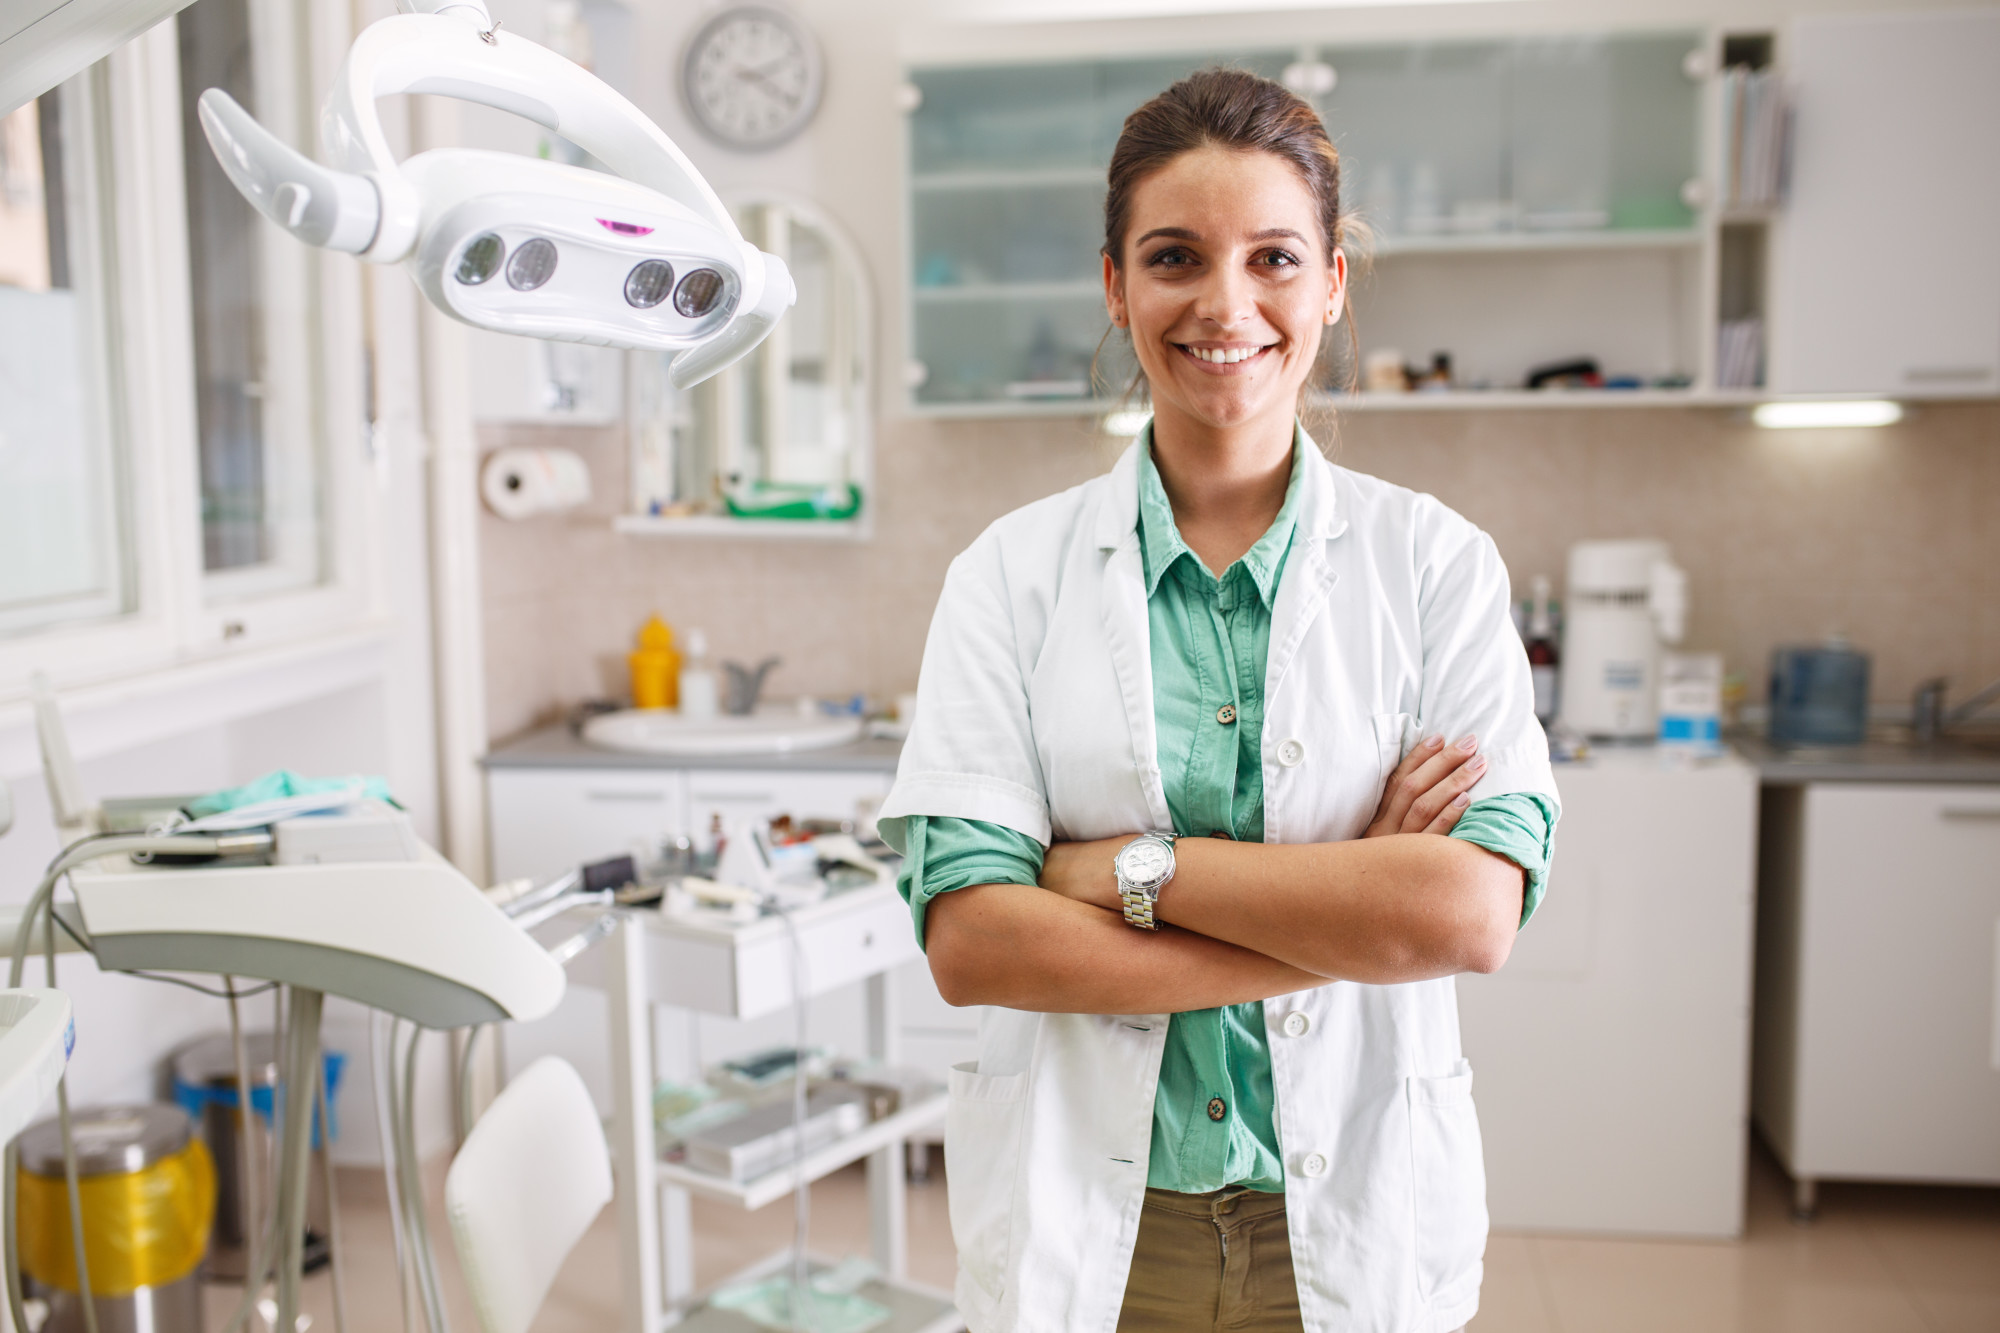 5 Things to Consider When Choosing an Orthodontist